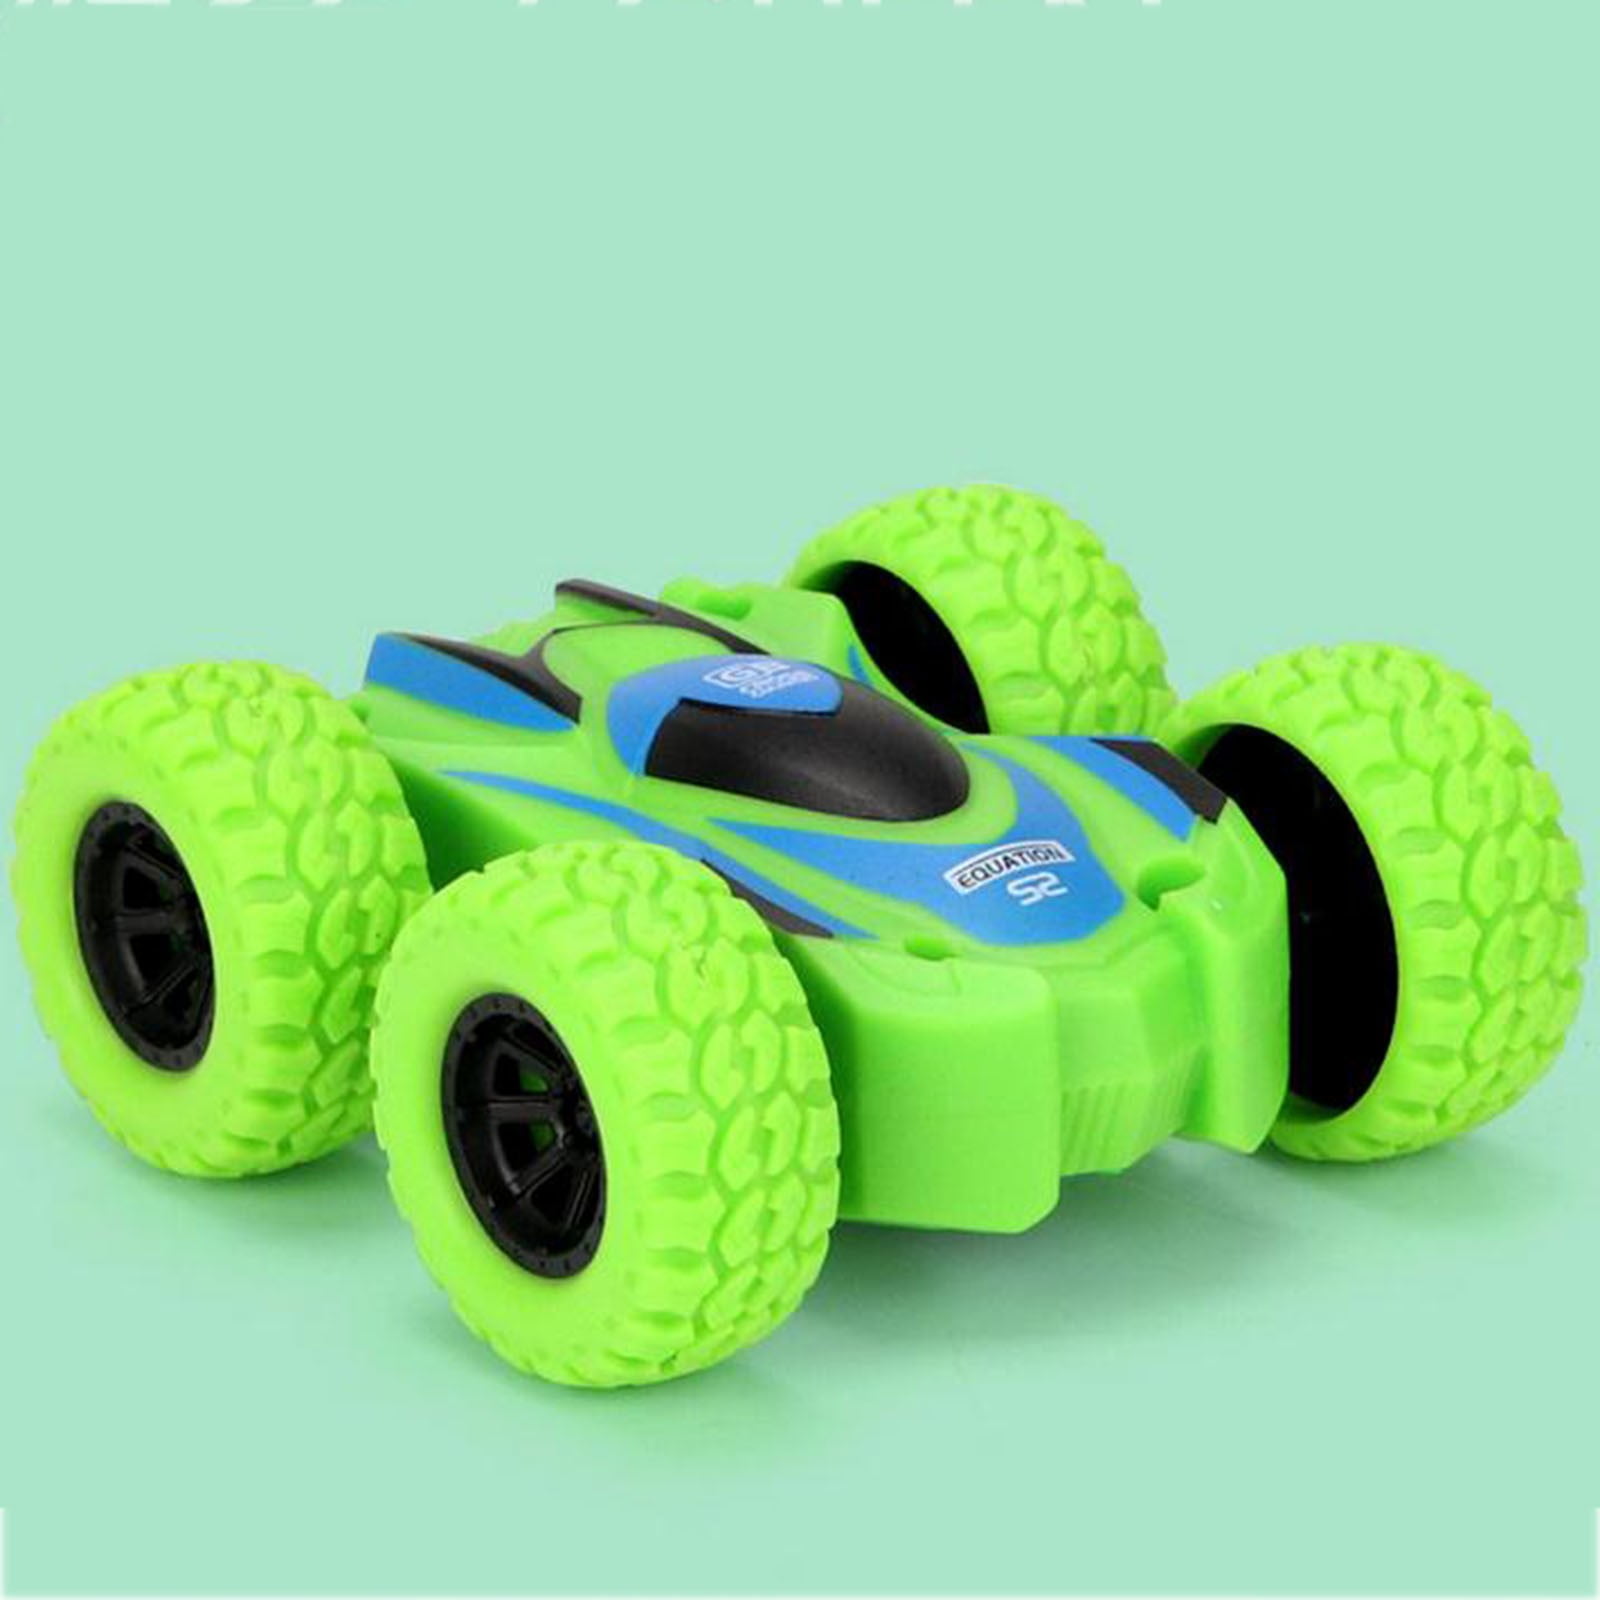 Birthday Party Supplies for Toddlers Kids Ages 3+ 8 Shells Monster Truck Toys for Boys and Girls 2 Cars Friction Powered Push and Go Toy Cars Inertia Car Pull Back Vehicle Playsets